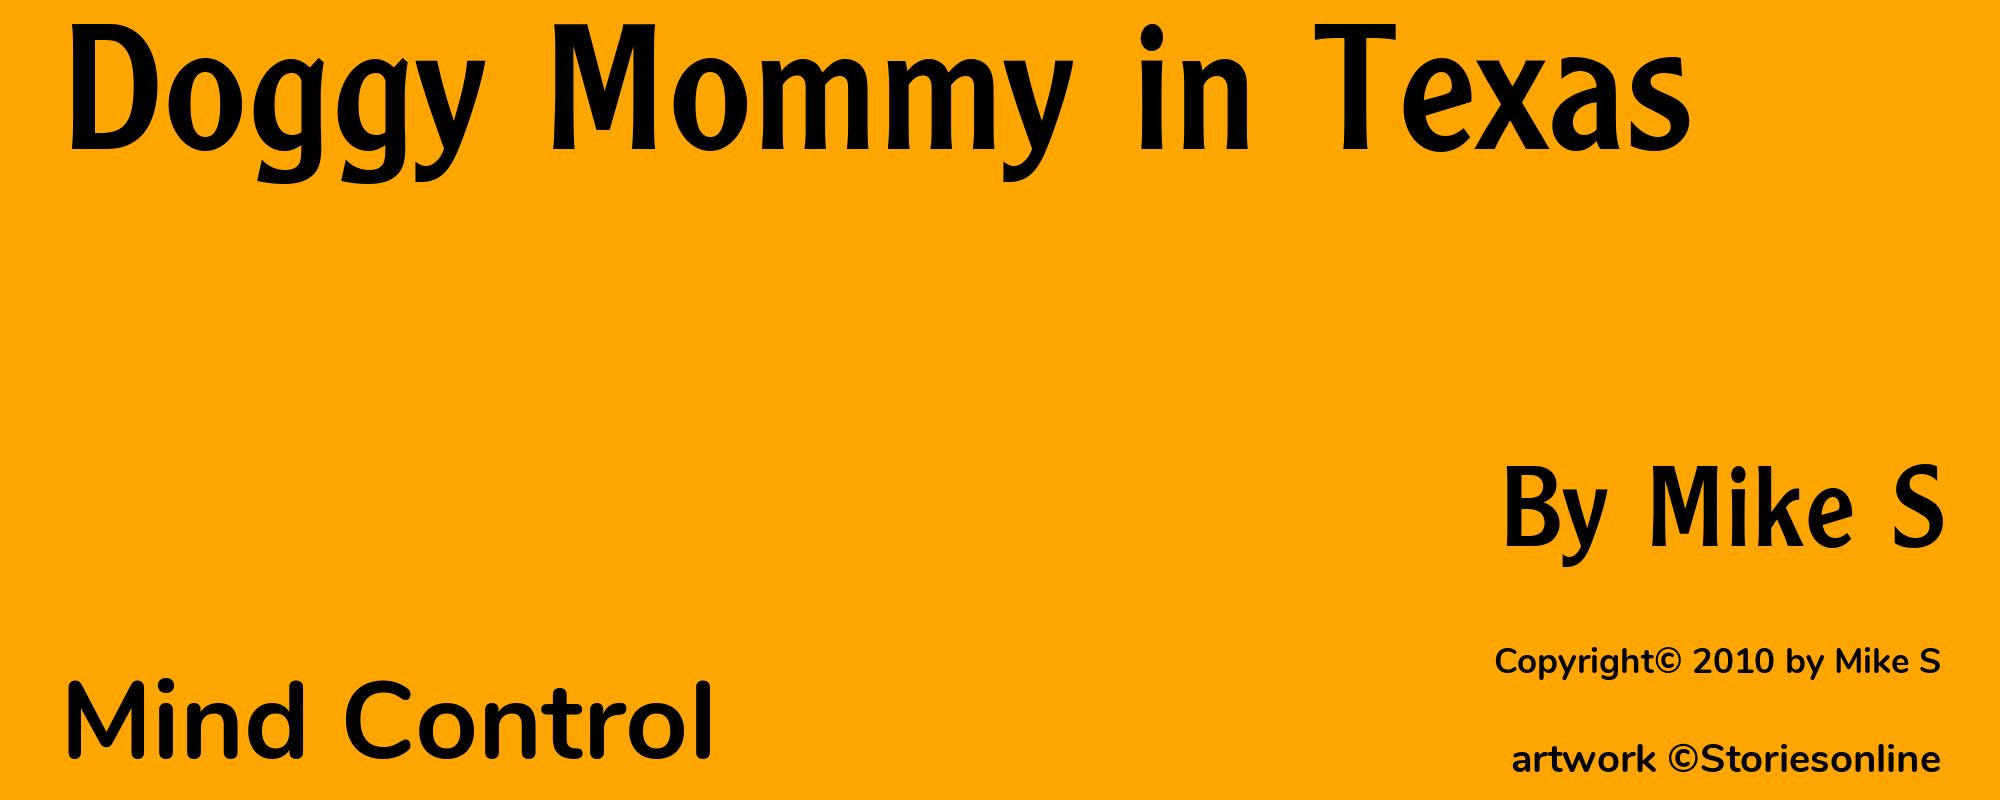 Doggy Mommy in Texas - Cover